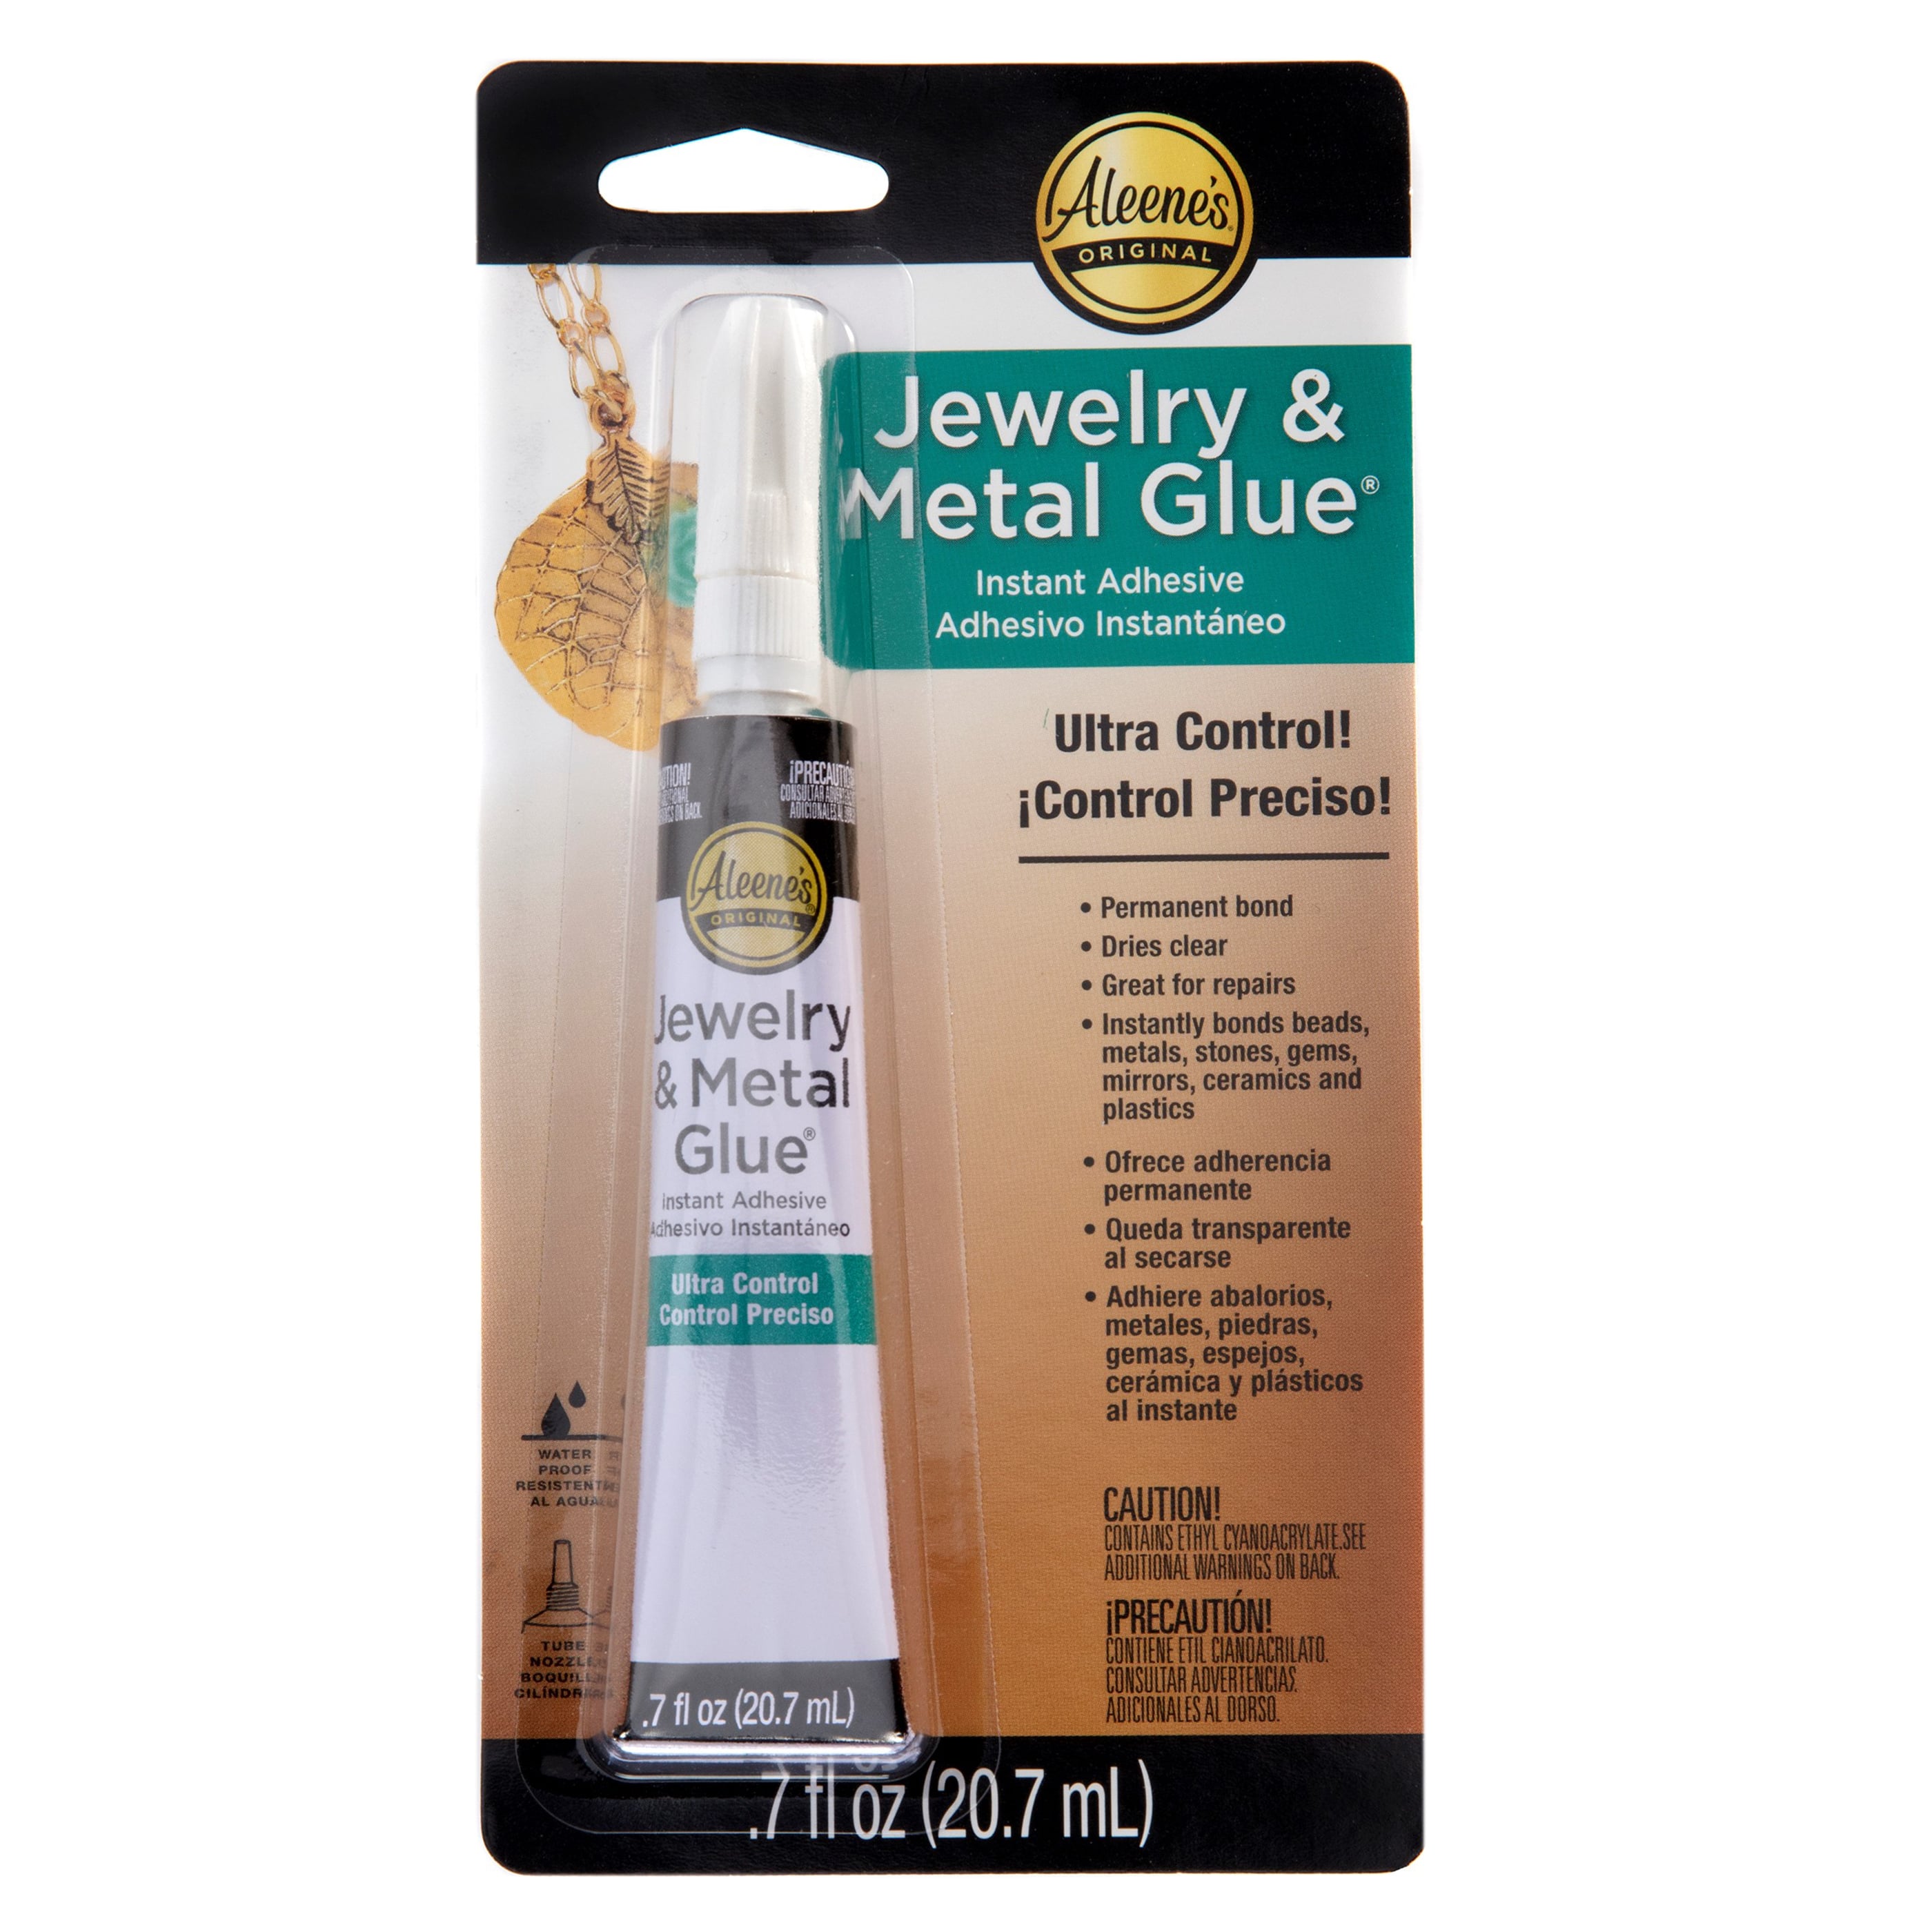 Glue for jewelry 30ml HASULITH